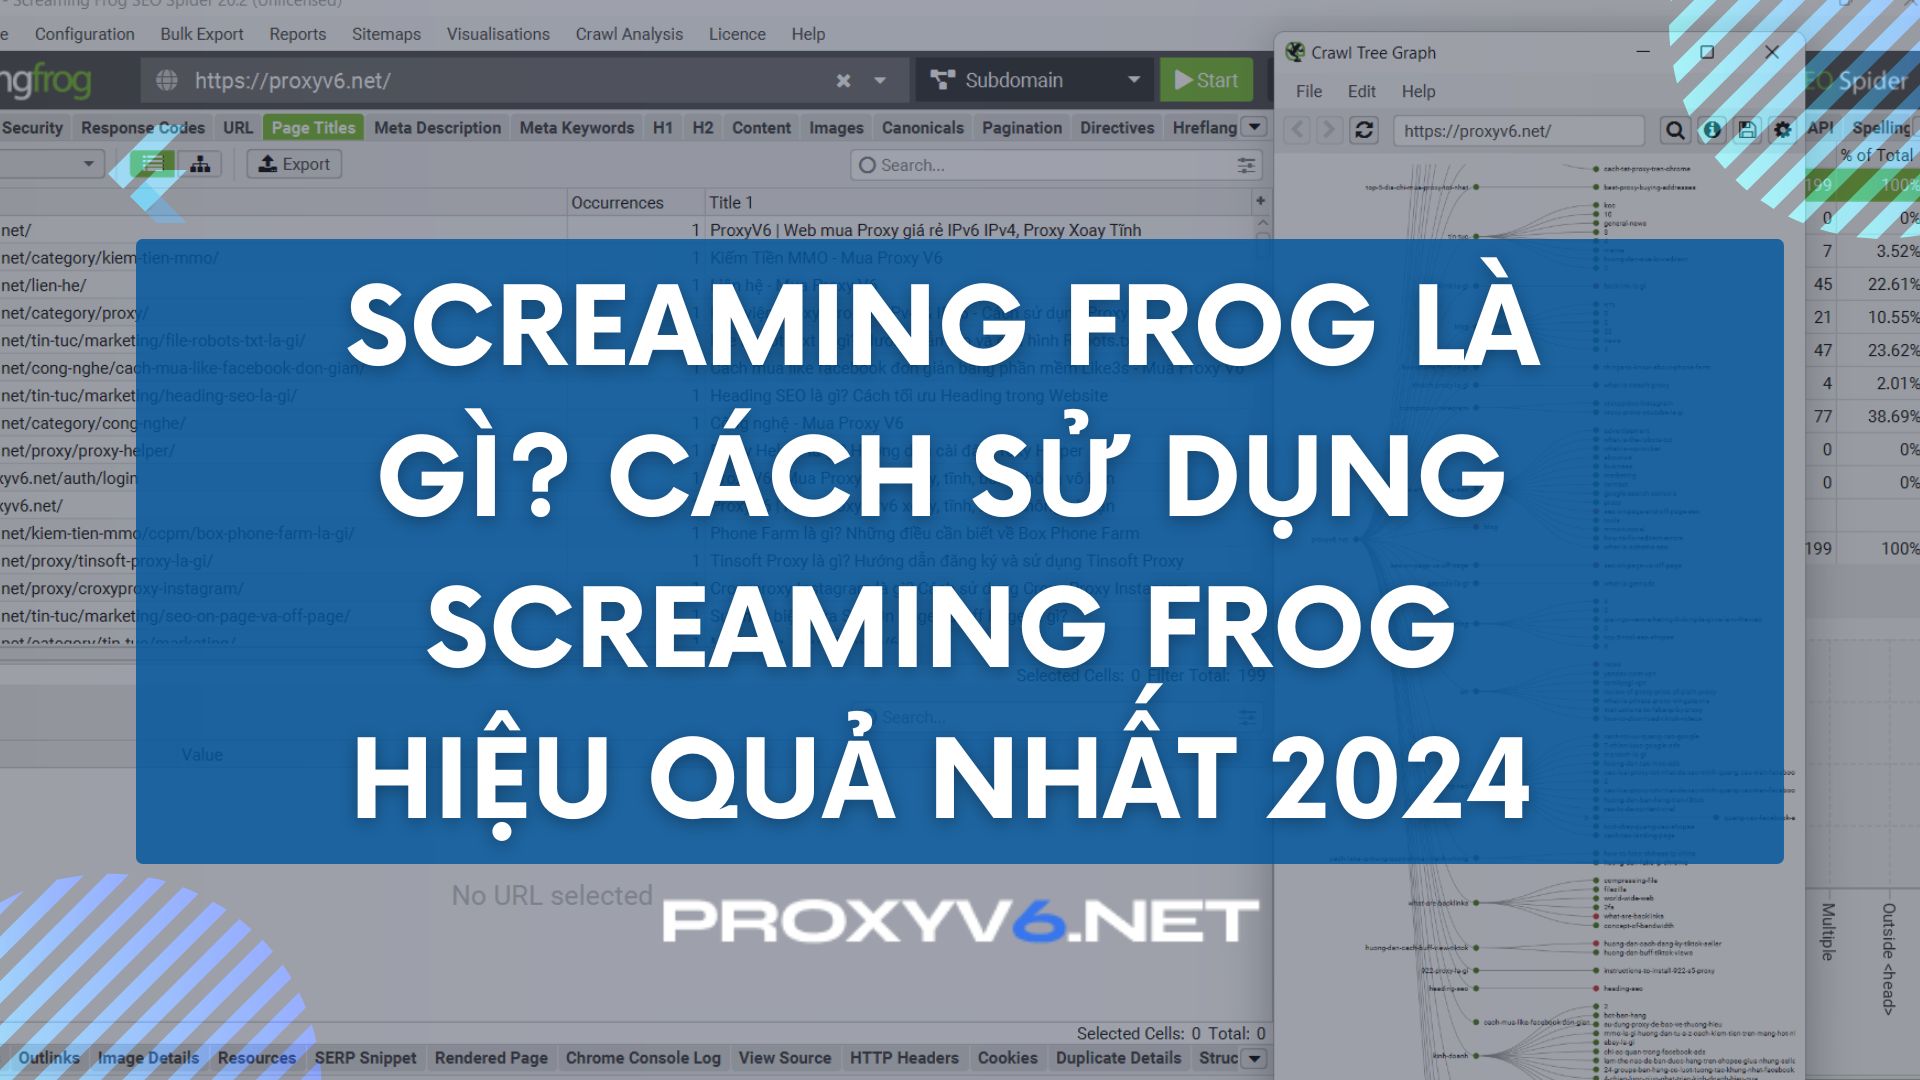 What is Screaming Frog? How to use Screaming Frog effectively in 2024